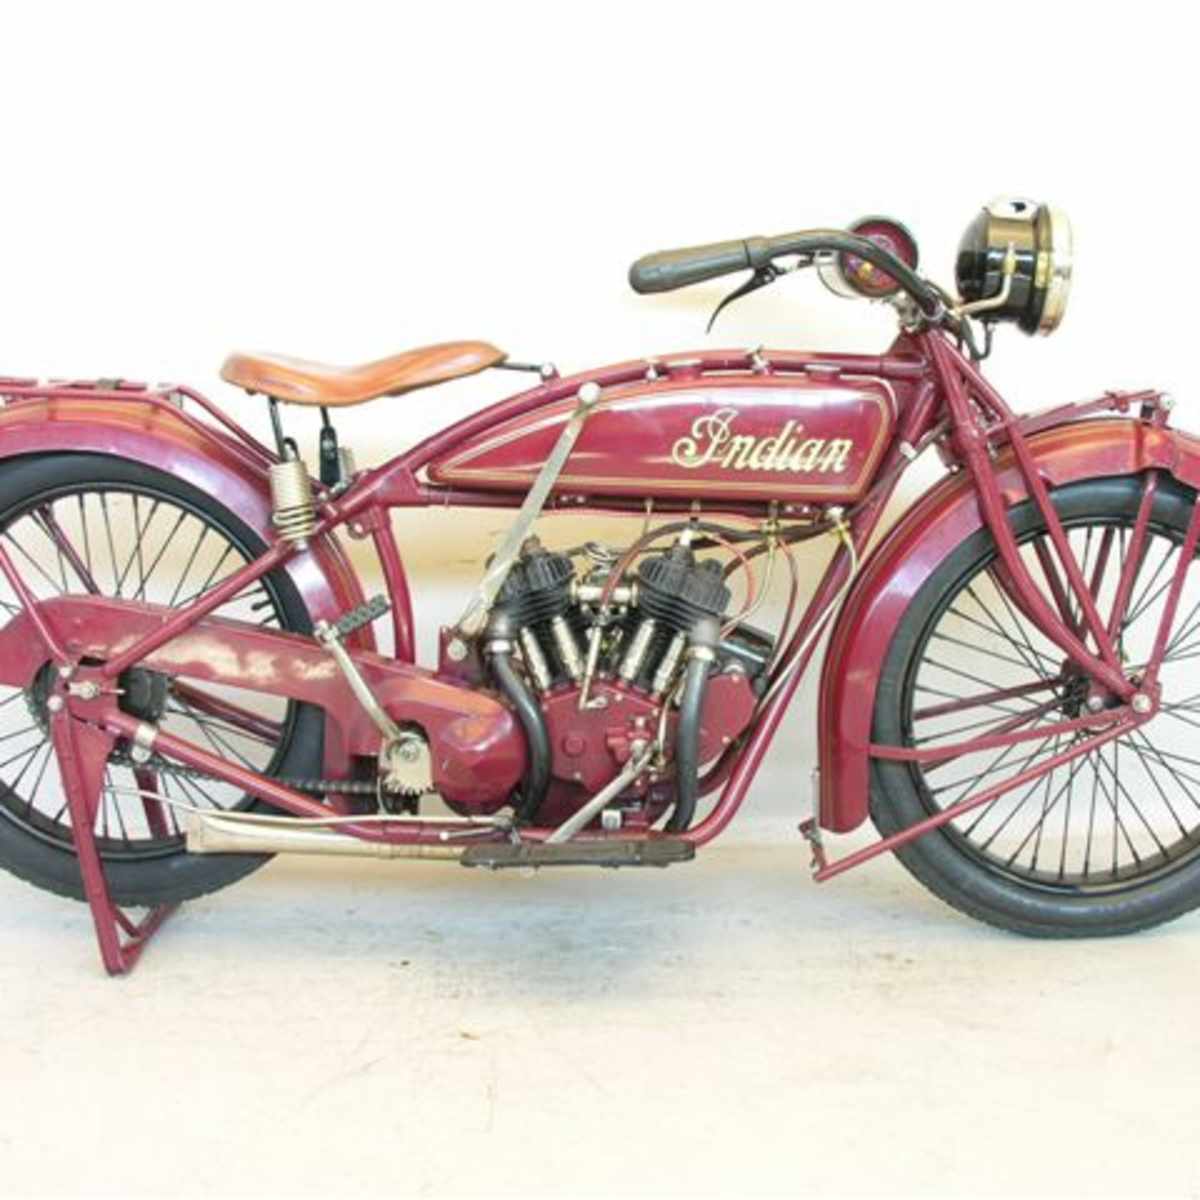 vintage motorcycles for sale cheap